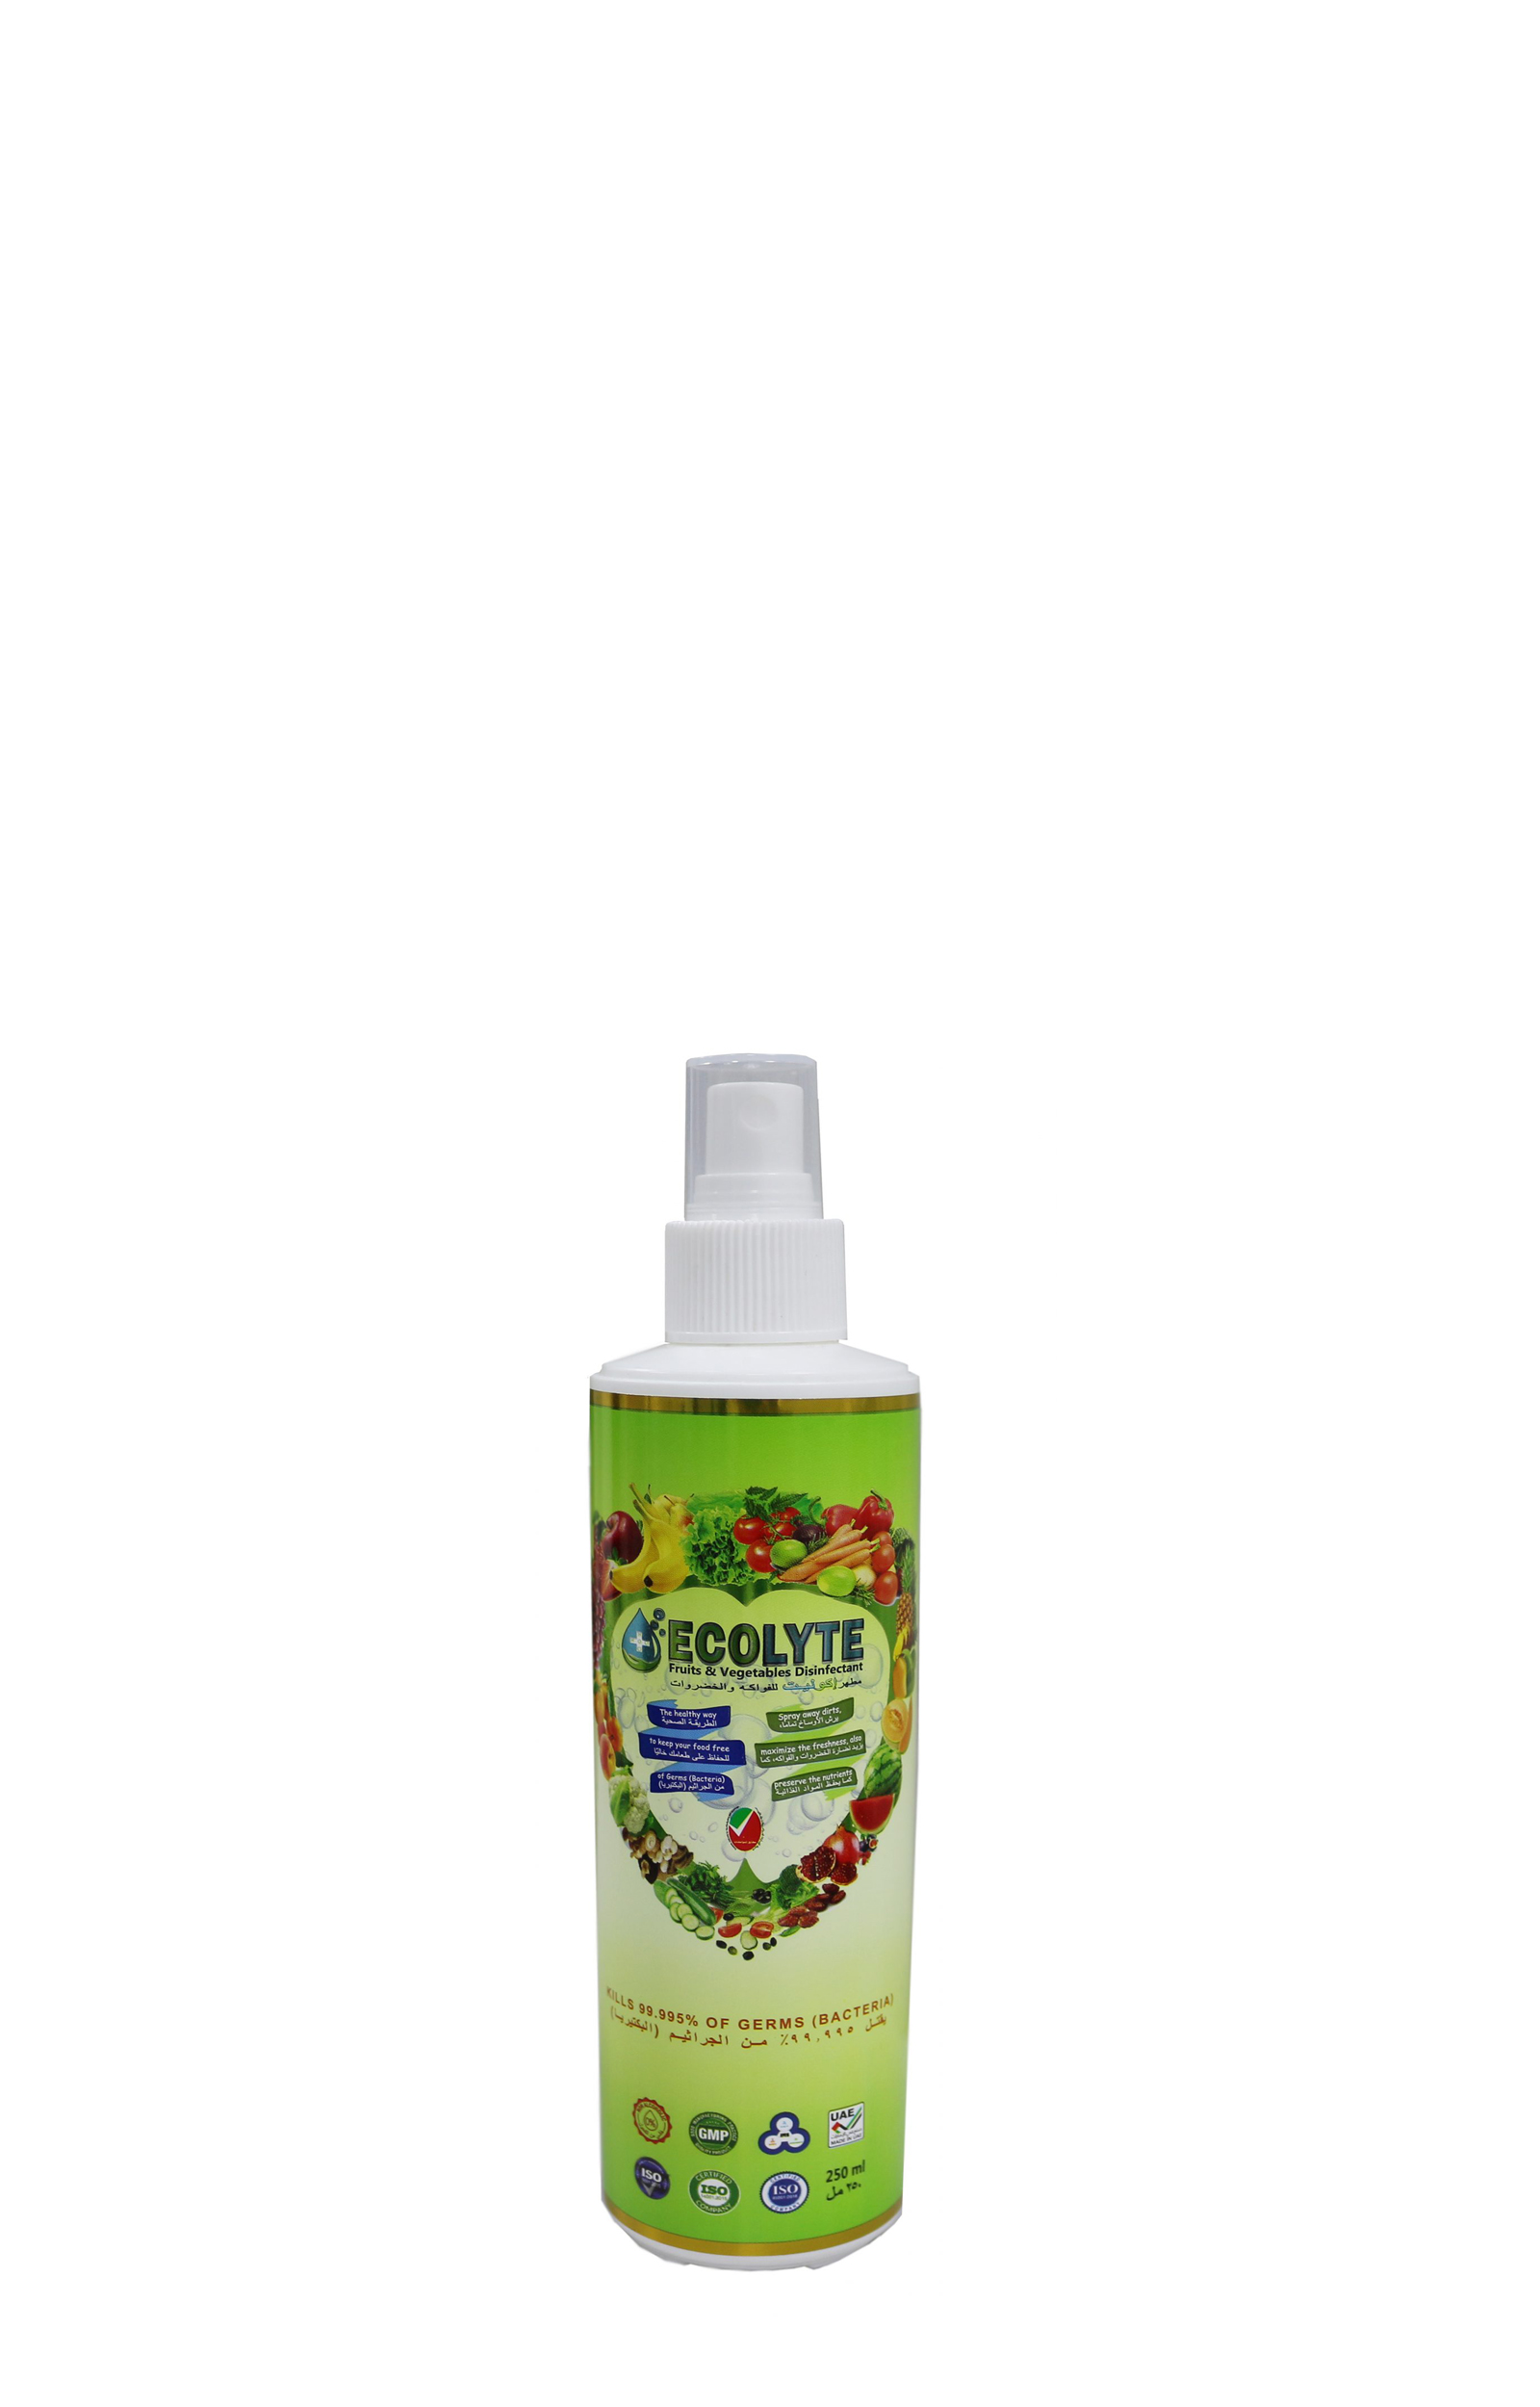 Ecolyte Fruits & Vegetables Disinfectant 100% Natural - 250 ml